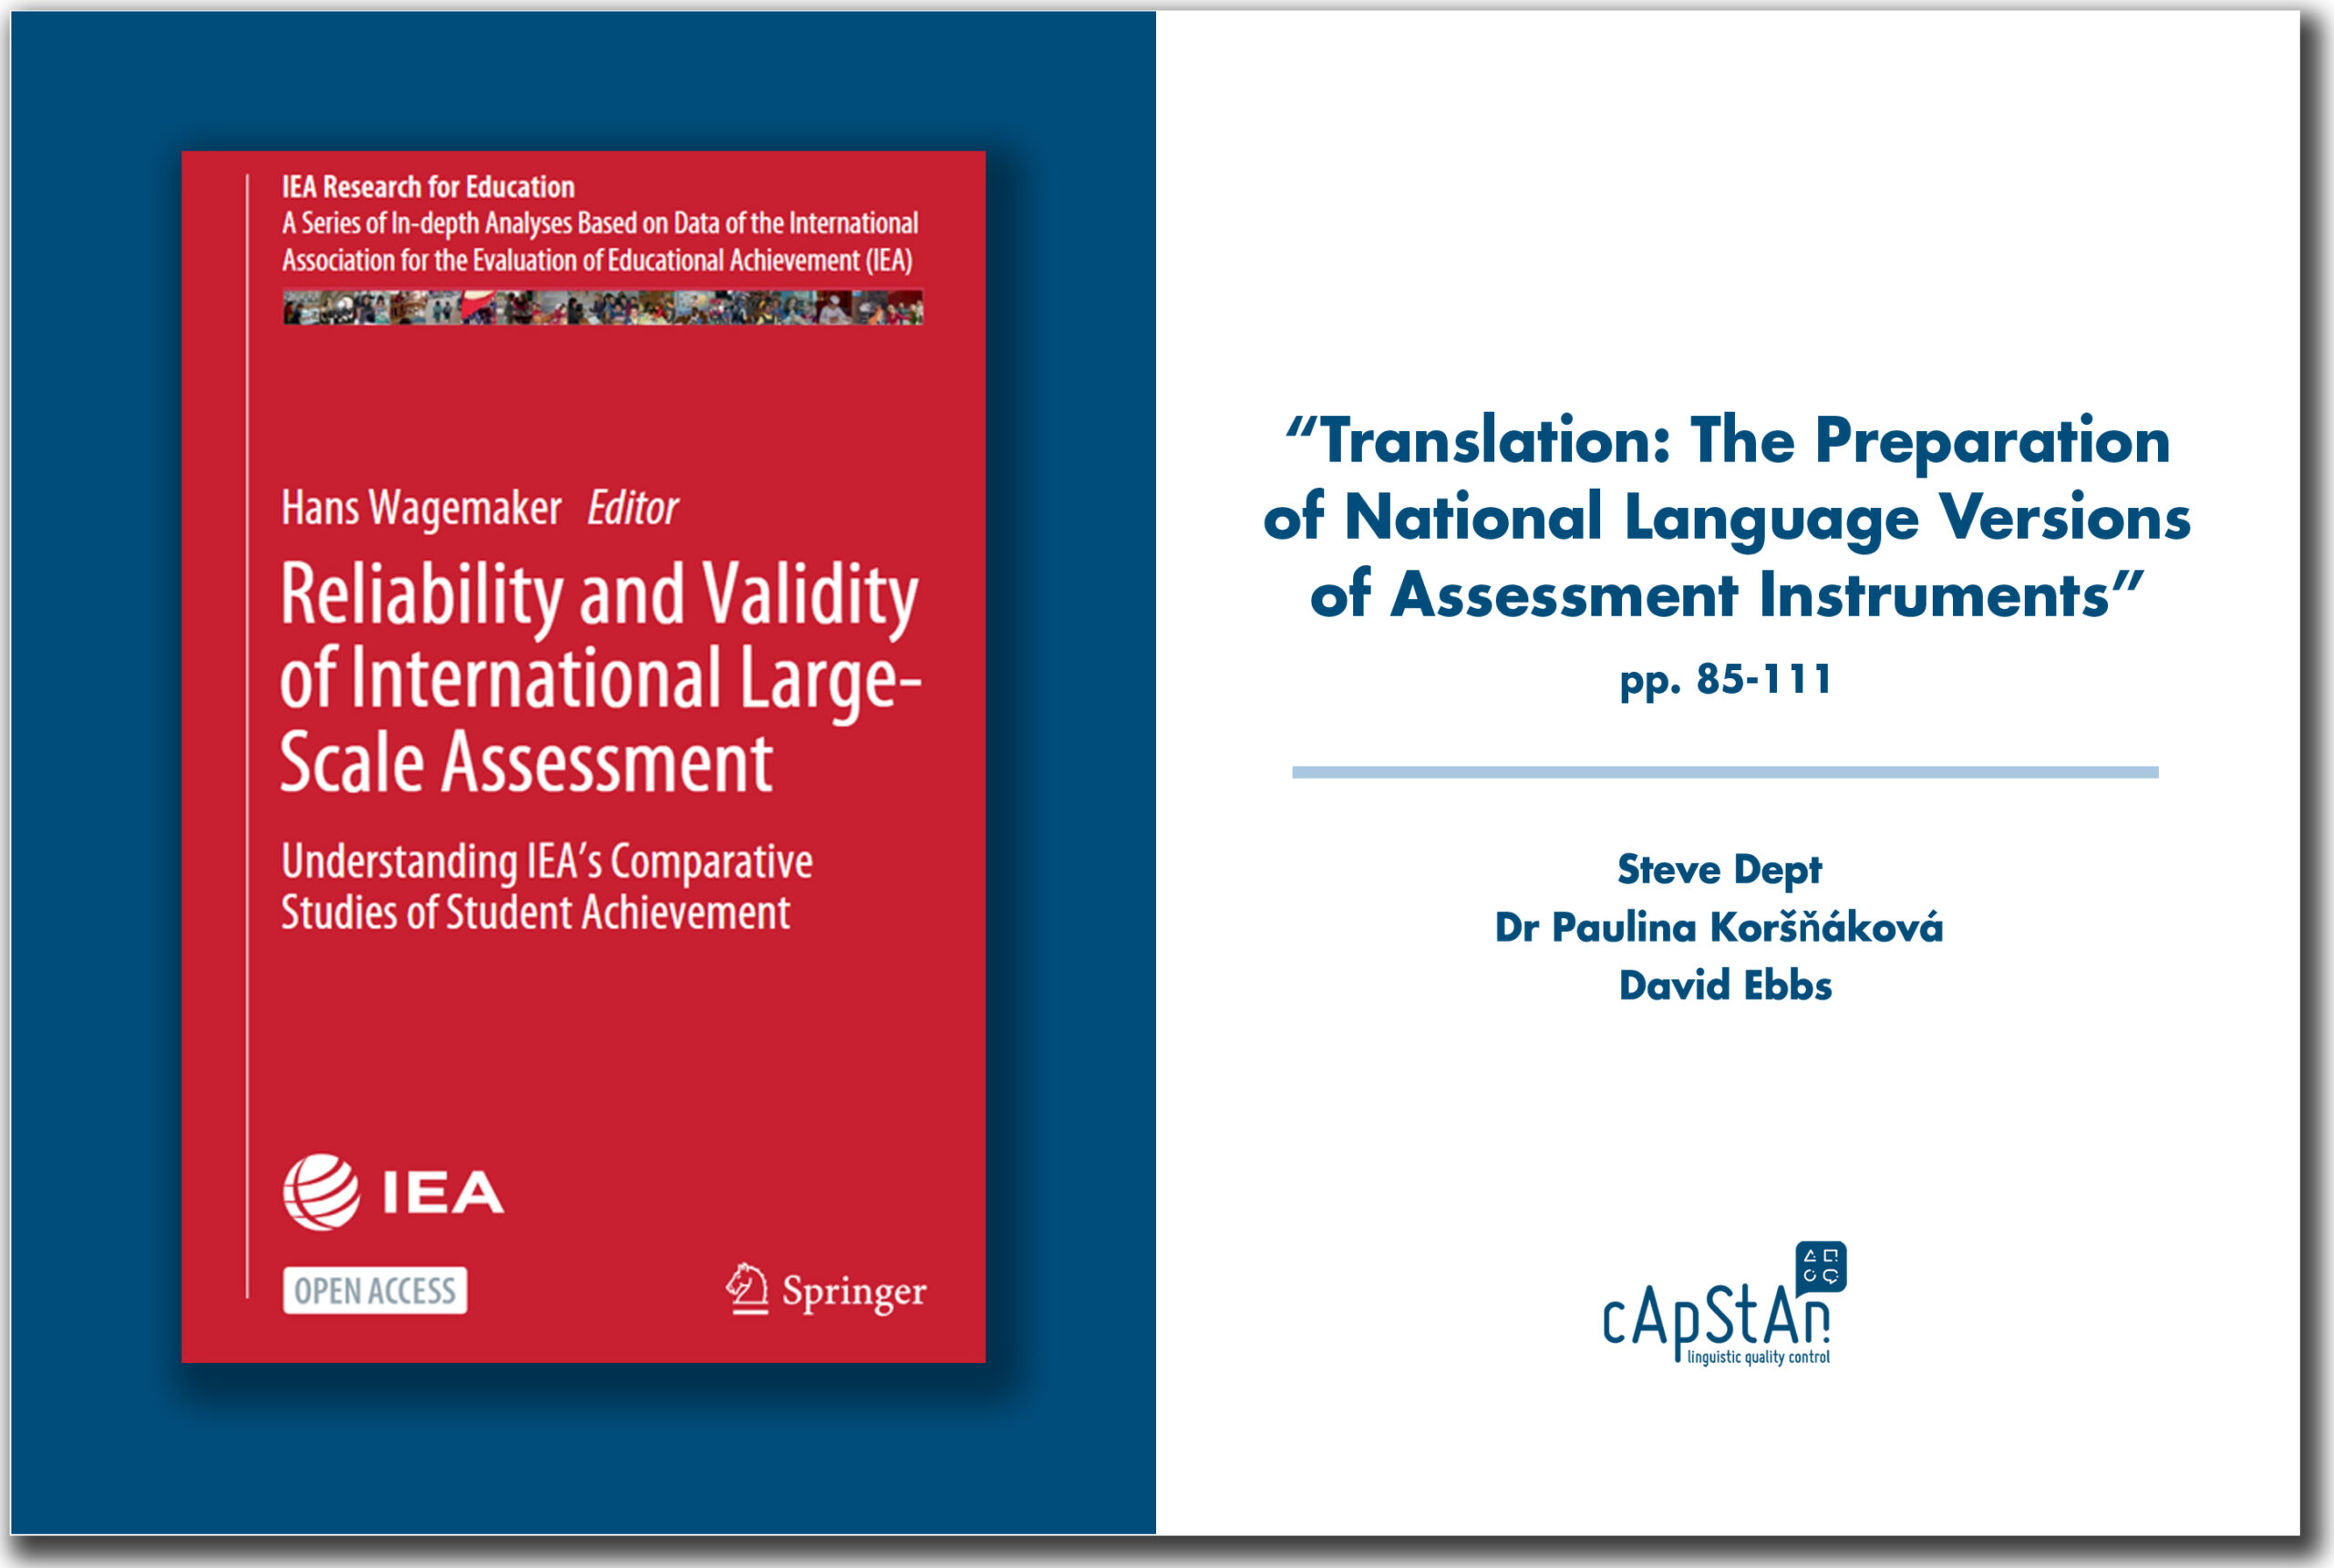 Reliability and validity of international large scale assessment